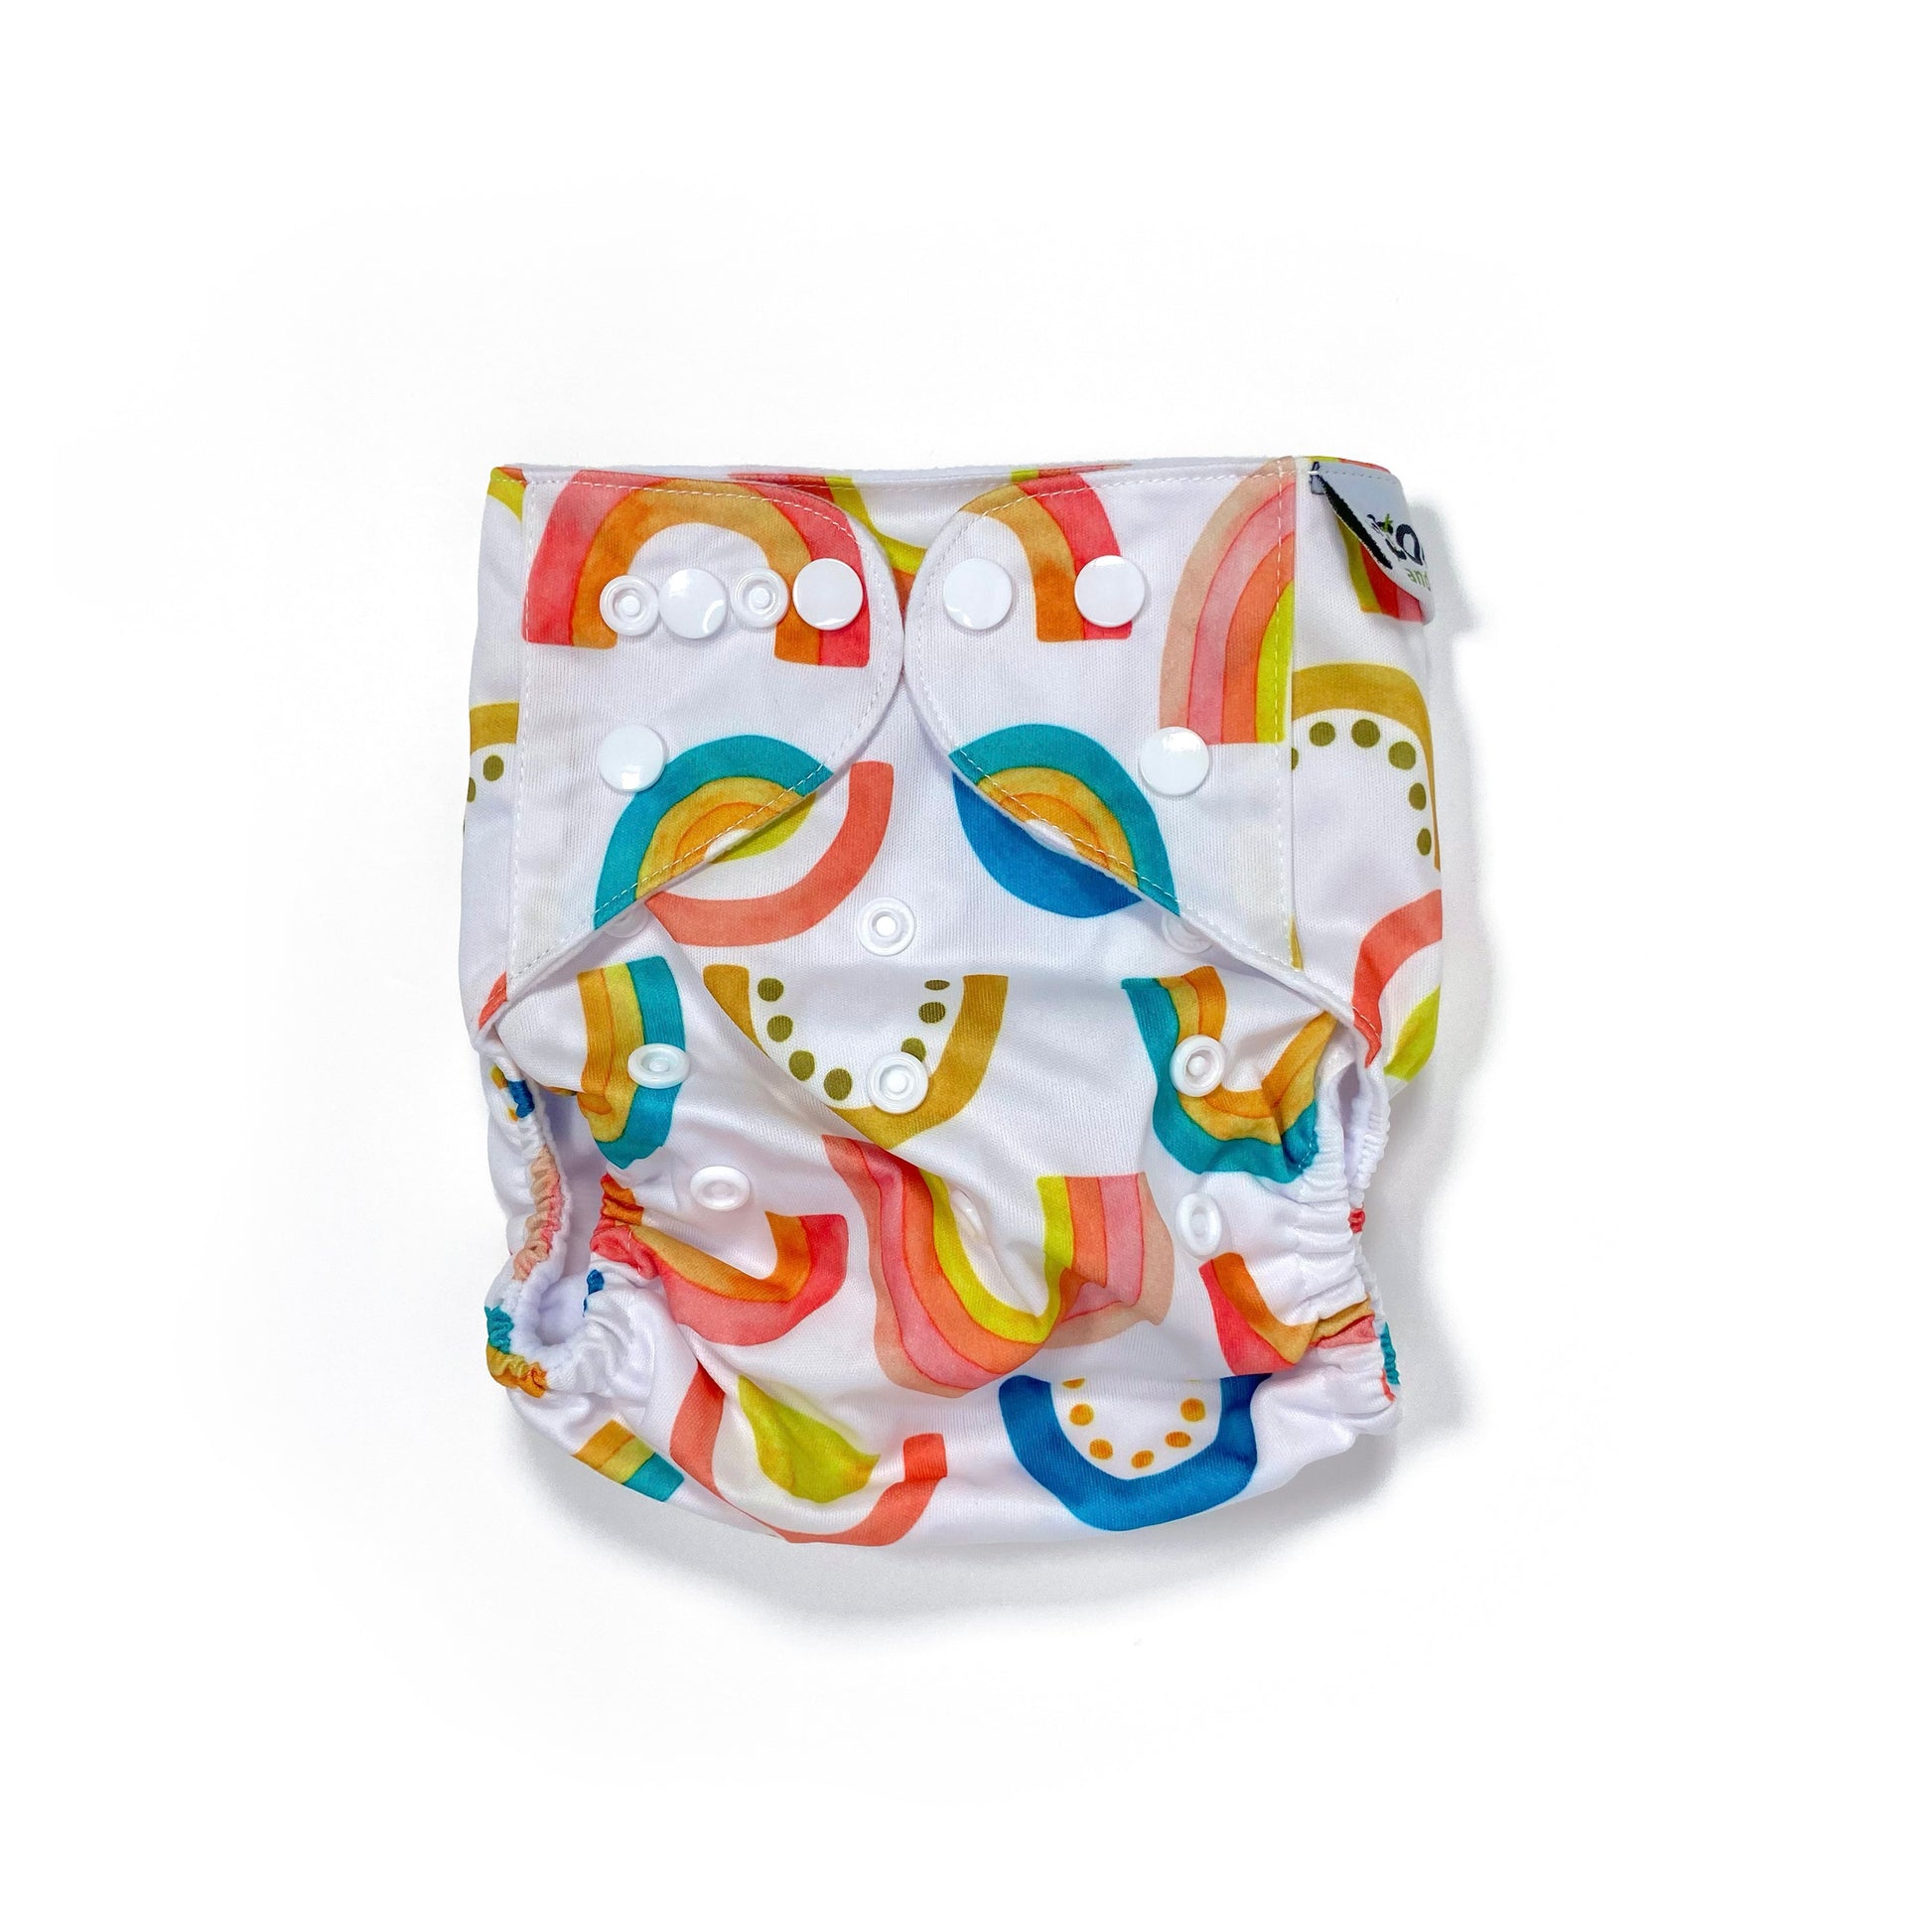 An adjustable reusable nappy for babies and toddlers, featuring a bright rainbow design, with brightly coloured rainbows on a white background. View shows the front of the nappy, with fastenings closed.